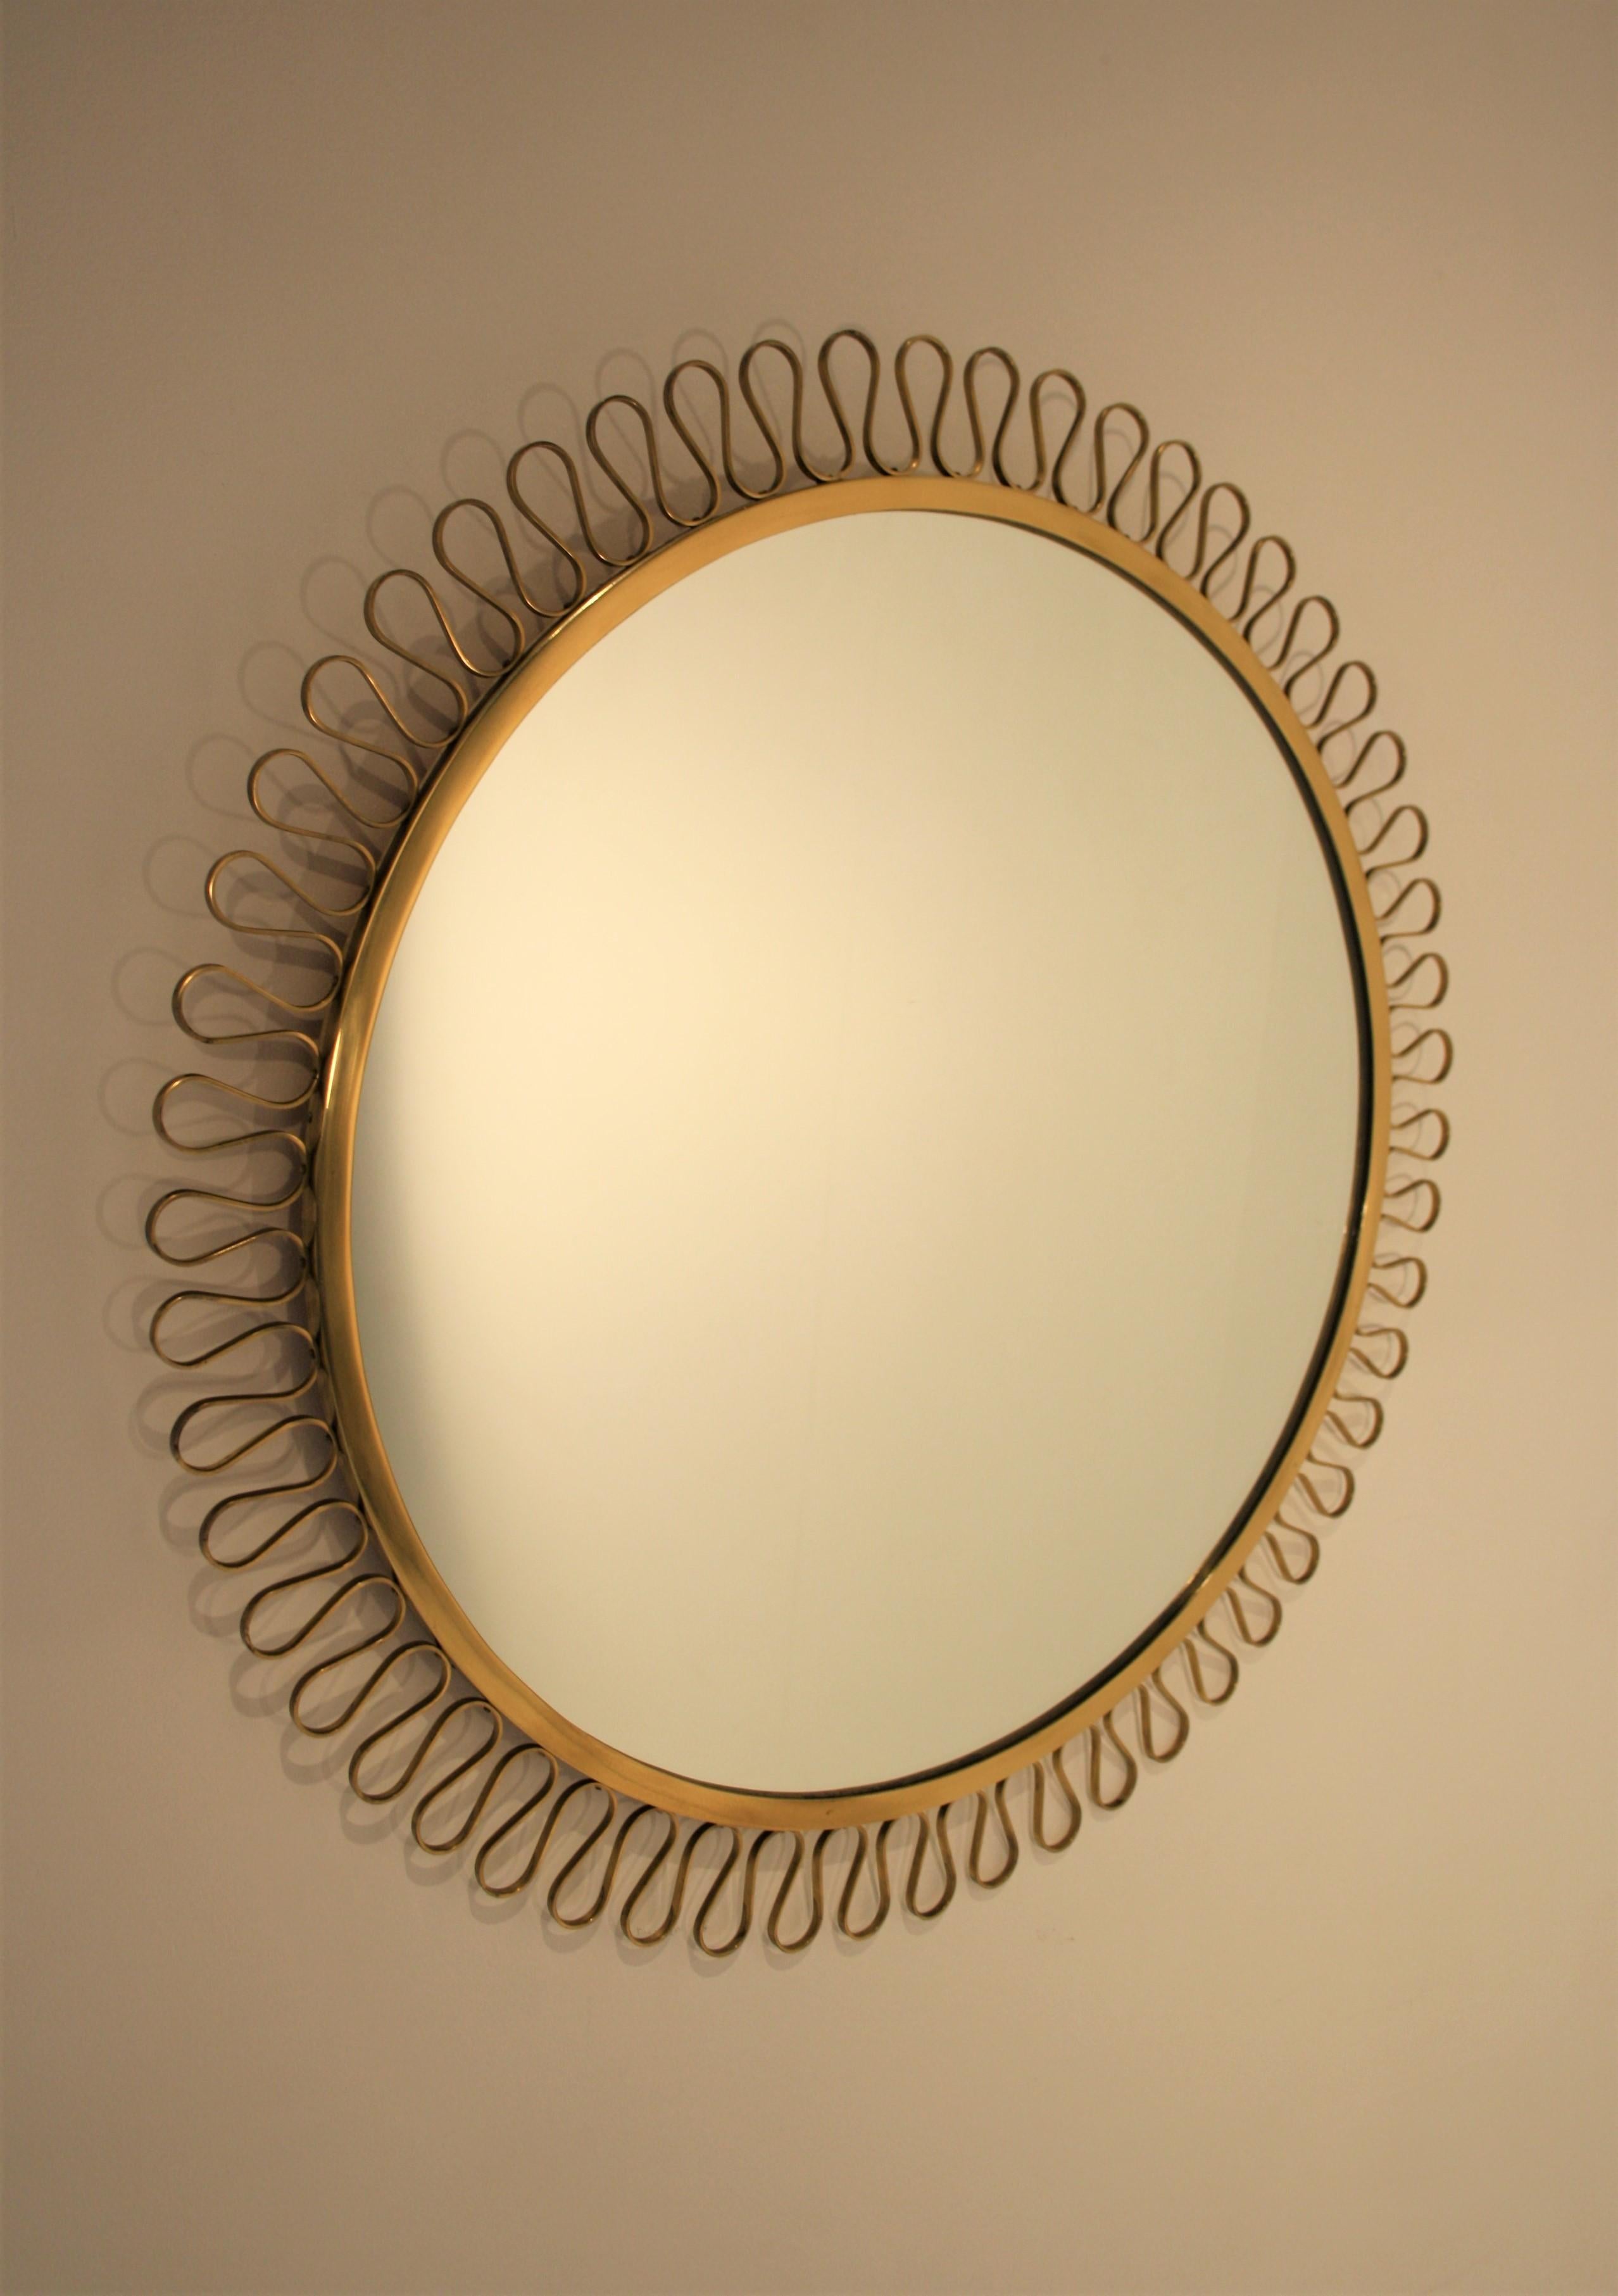 Beautiful Italian handmade brass mirror in the style of Gio Ponti from the 1950s.
A very fine quality and a beautiful craftsmanship, especially the way the decoration was attached around the mirror and also its shape made entirely from one piece.